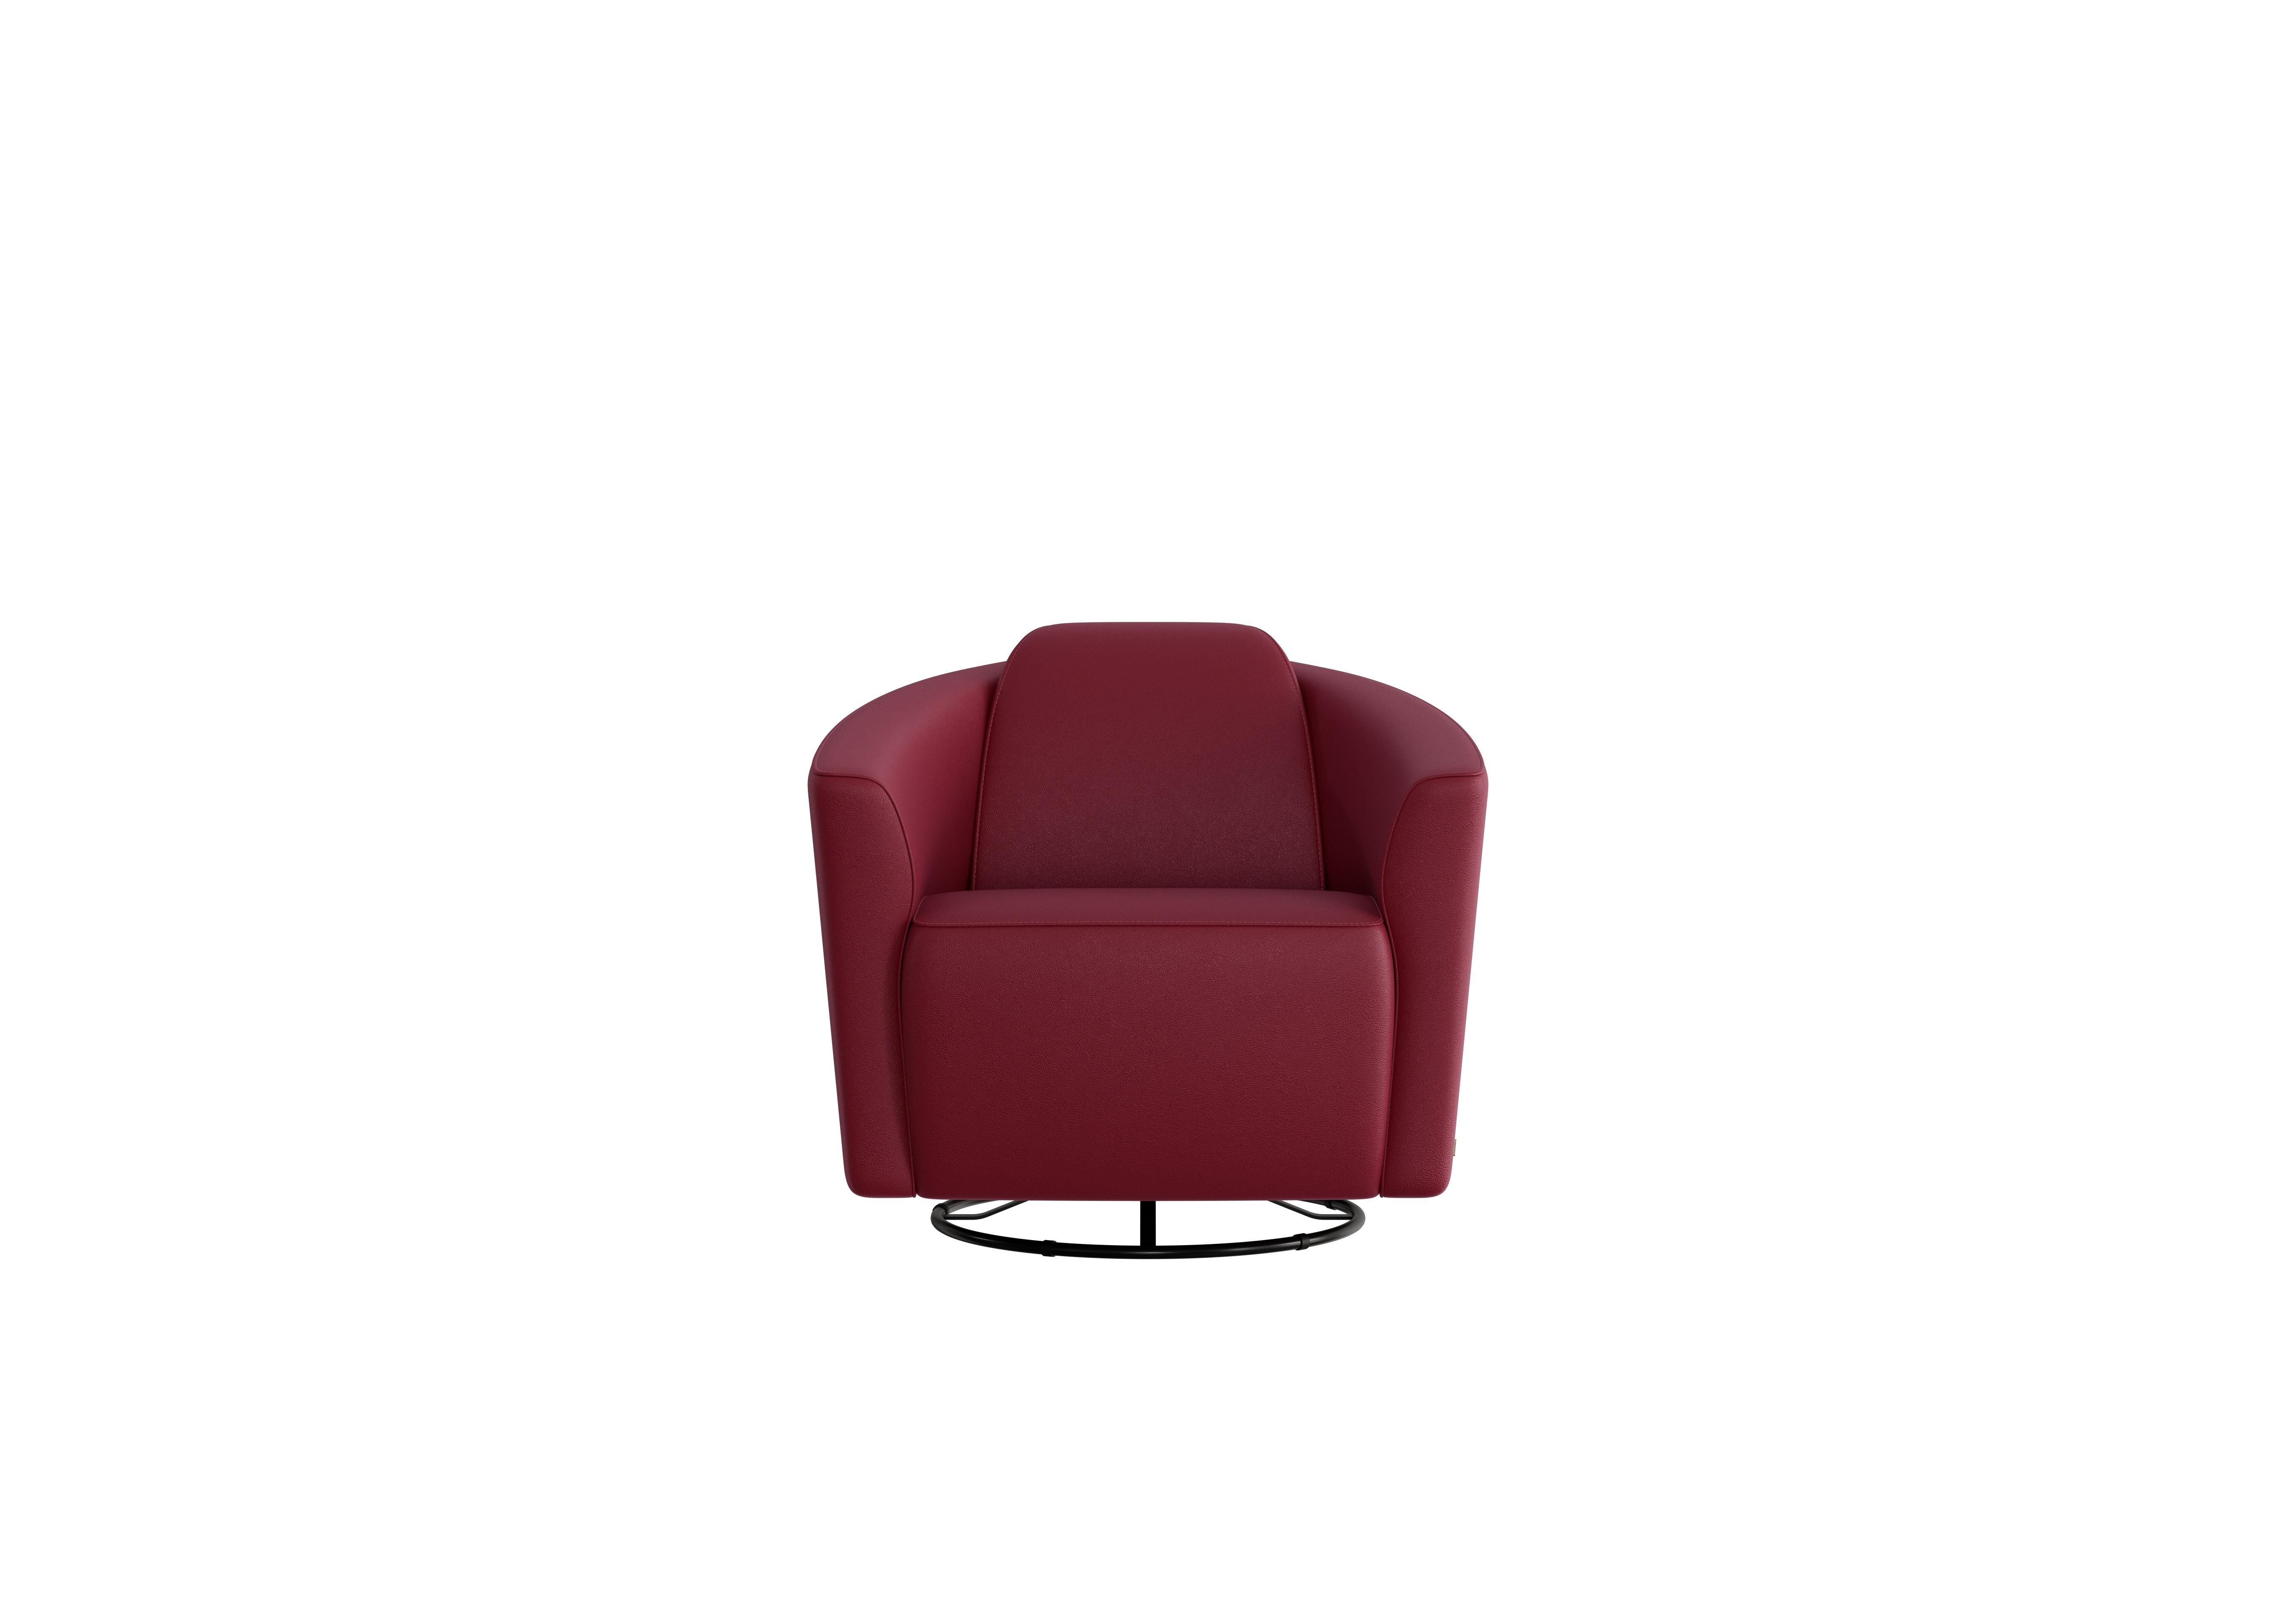 Ketty Leather Swivel Chair in Dali Bordeaux 1521 on Furniture Village